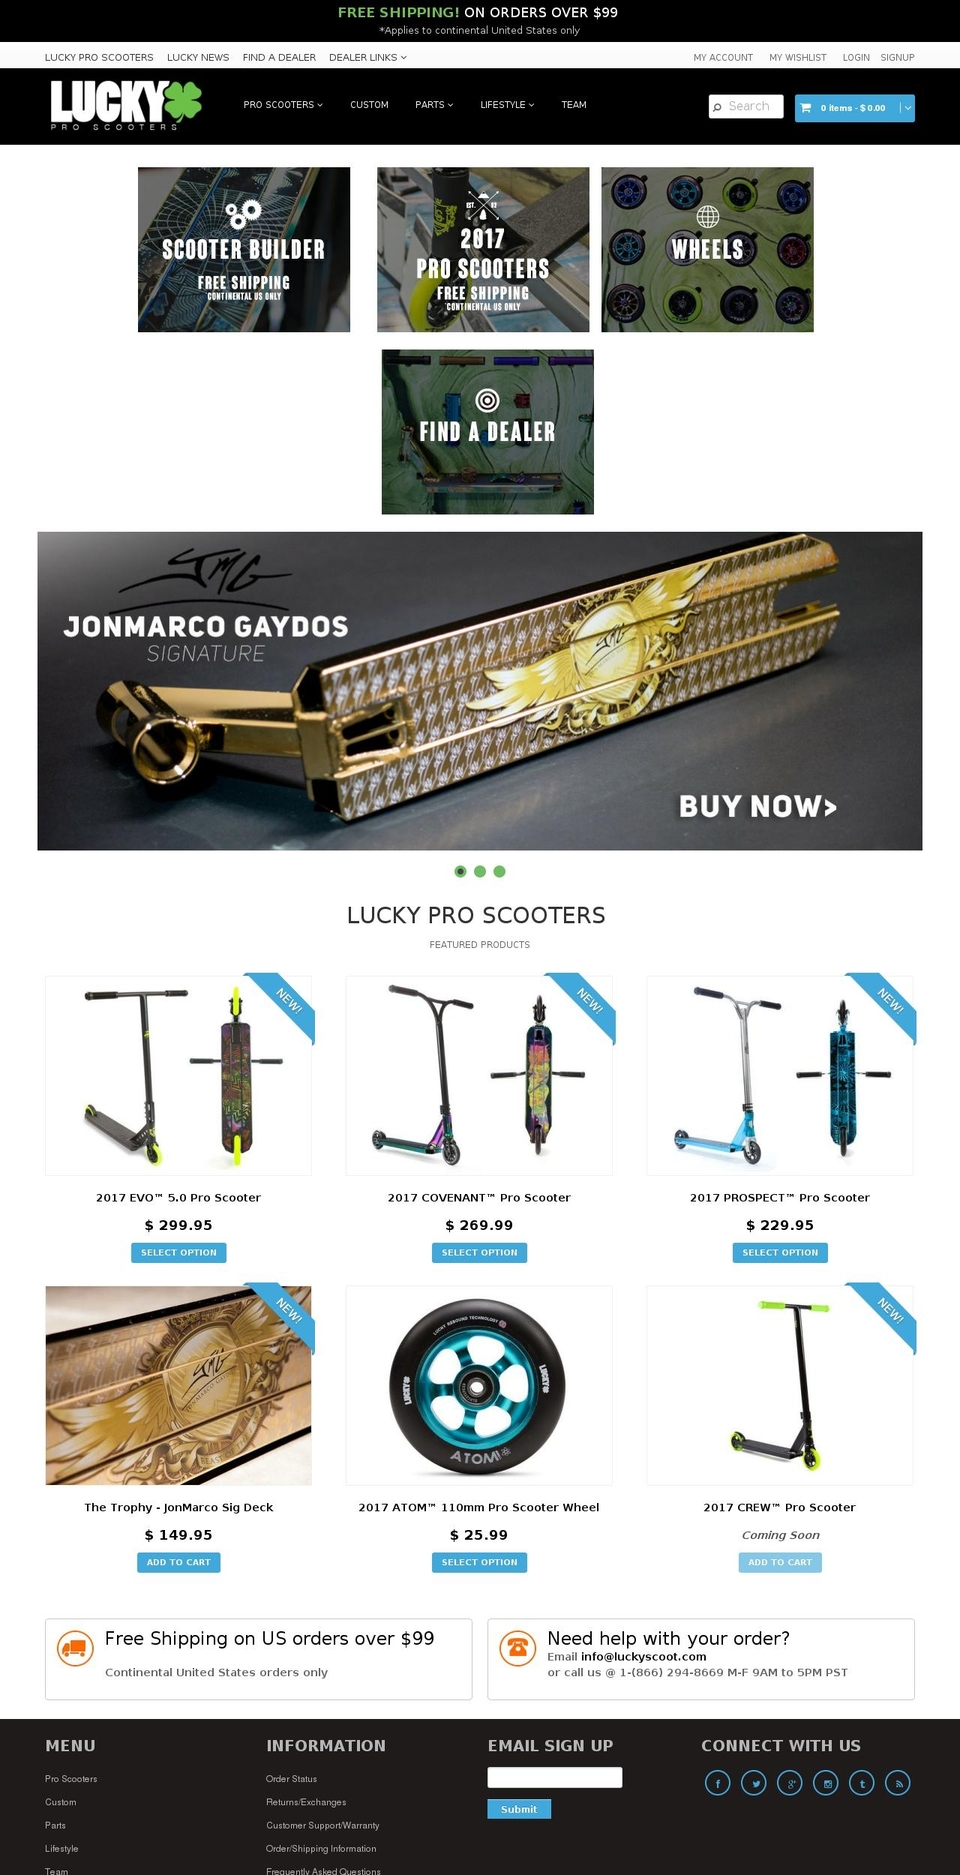 Mode Shopify theme site example luckyscooters.com